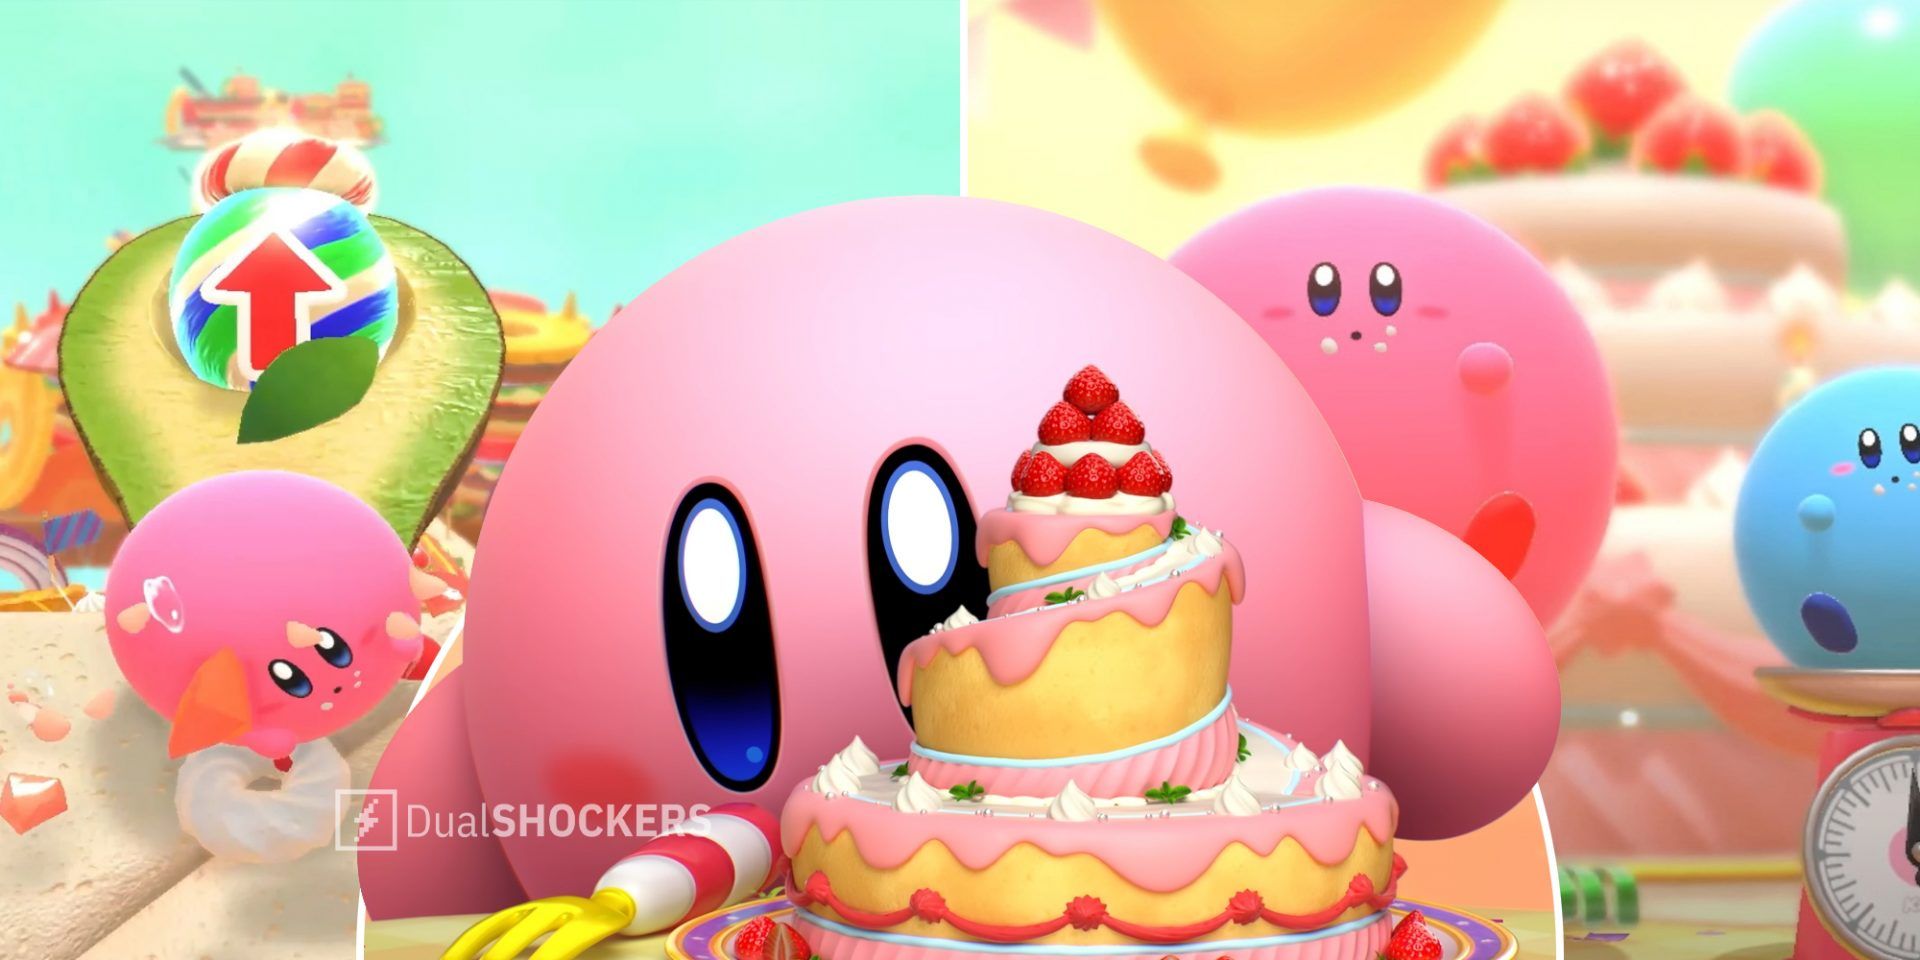 Kirby's Dream Buffet is coming to Nintendo Switch this summer